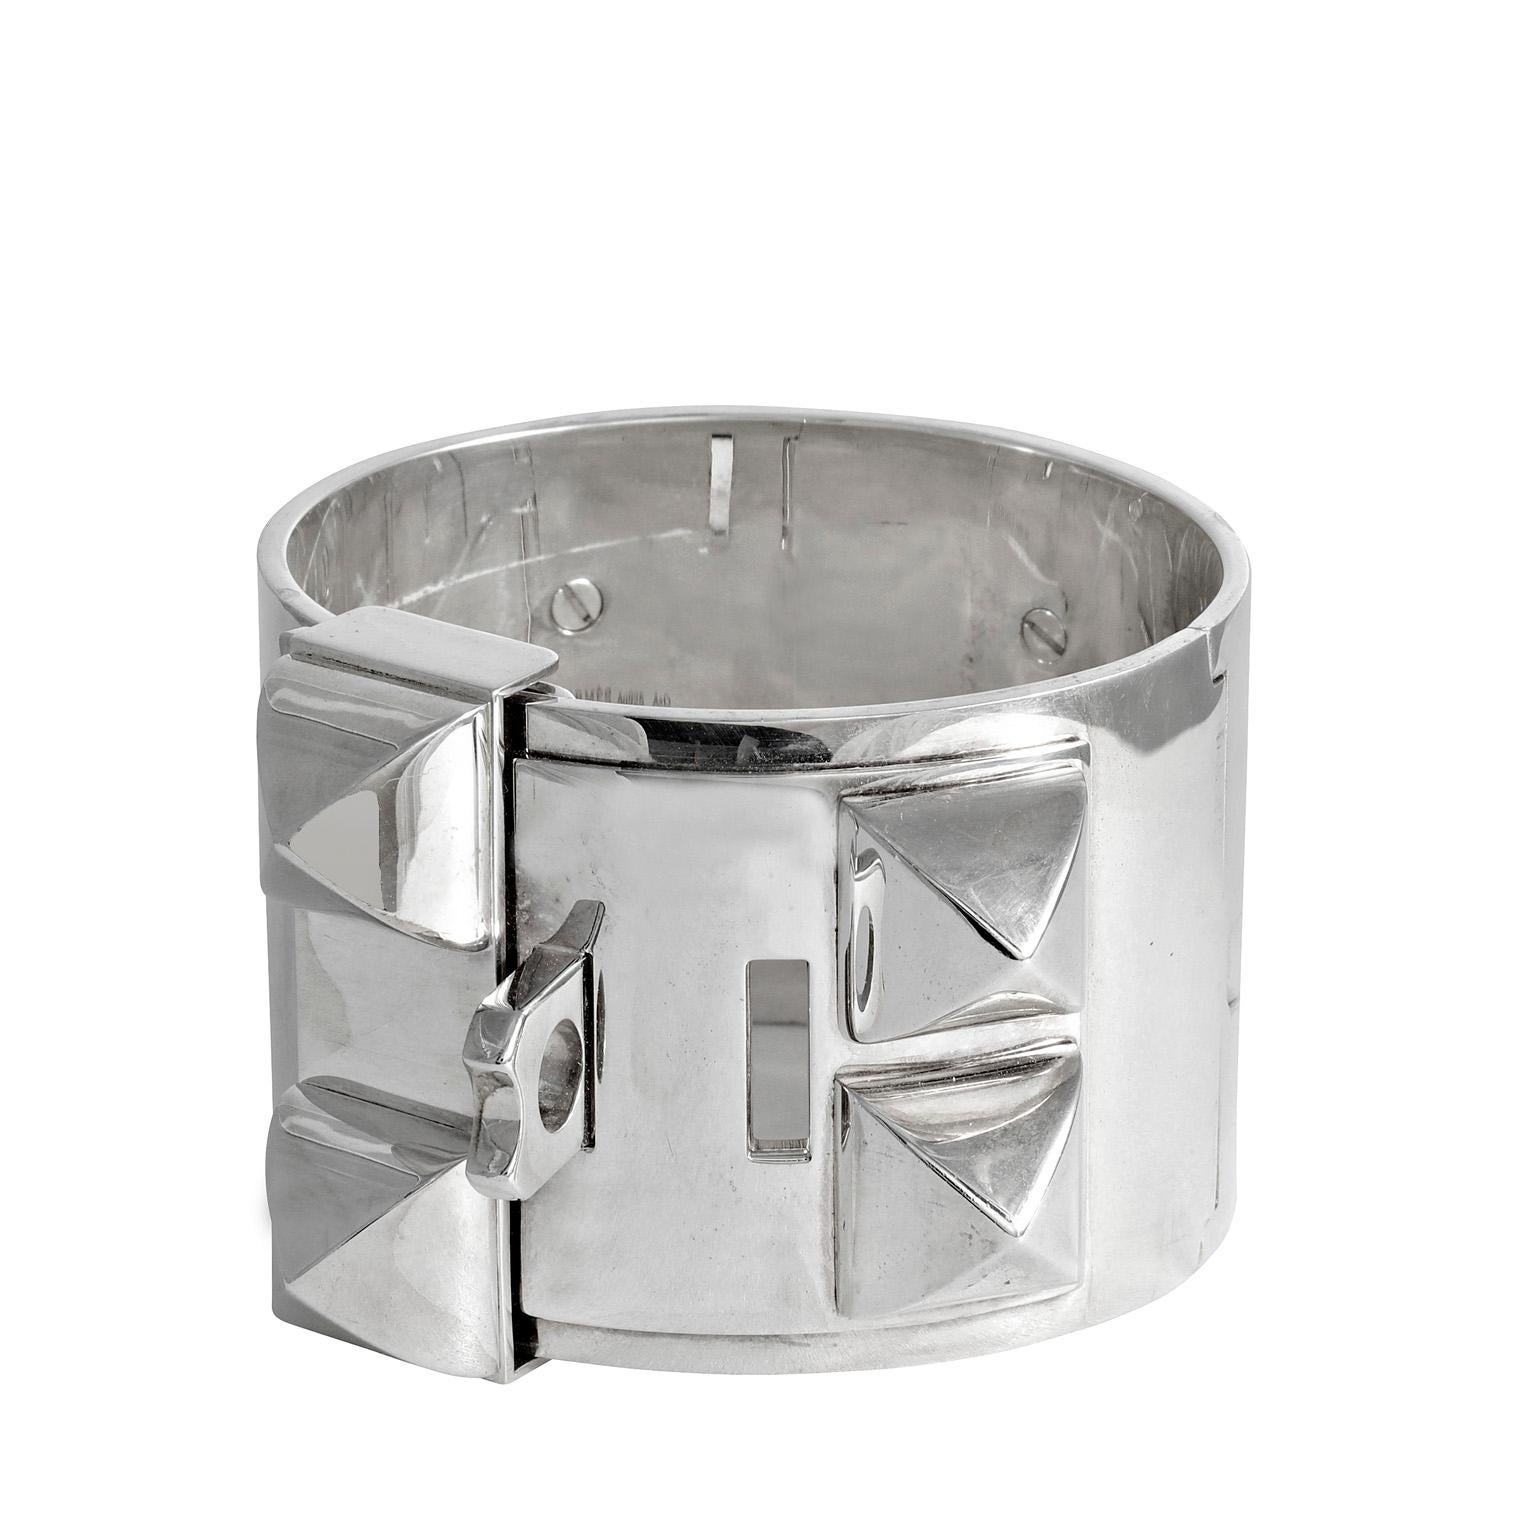 This authentic Hermès Silver Collier de Chien Cuff Bracelet is in pristine condition. Sterling silver iconic cuff.  Pyramid studs, hinged opening, adjustable length.  PM size. Box included.

PBF 12787